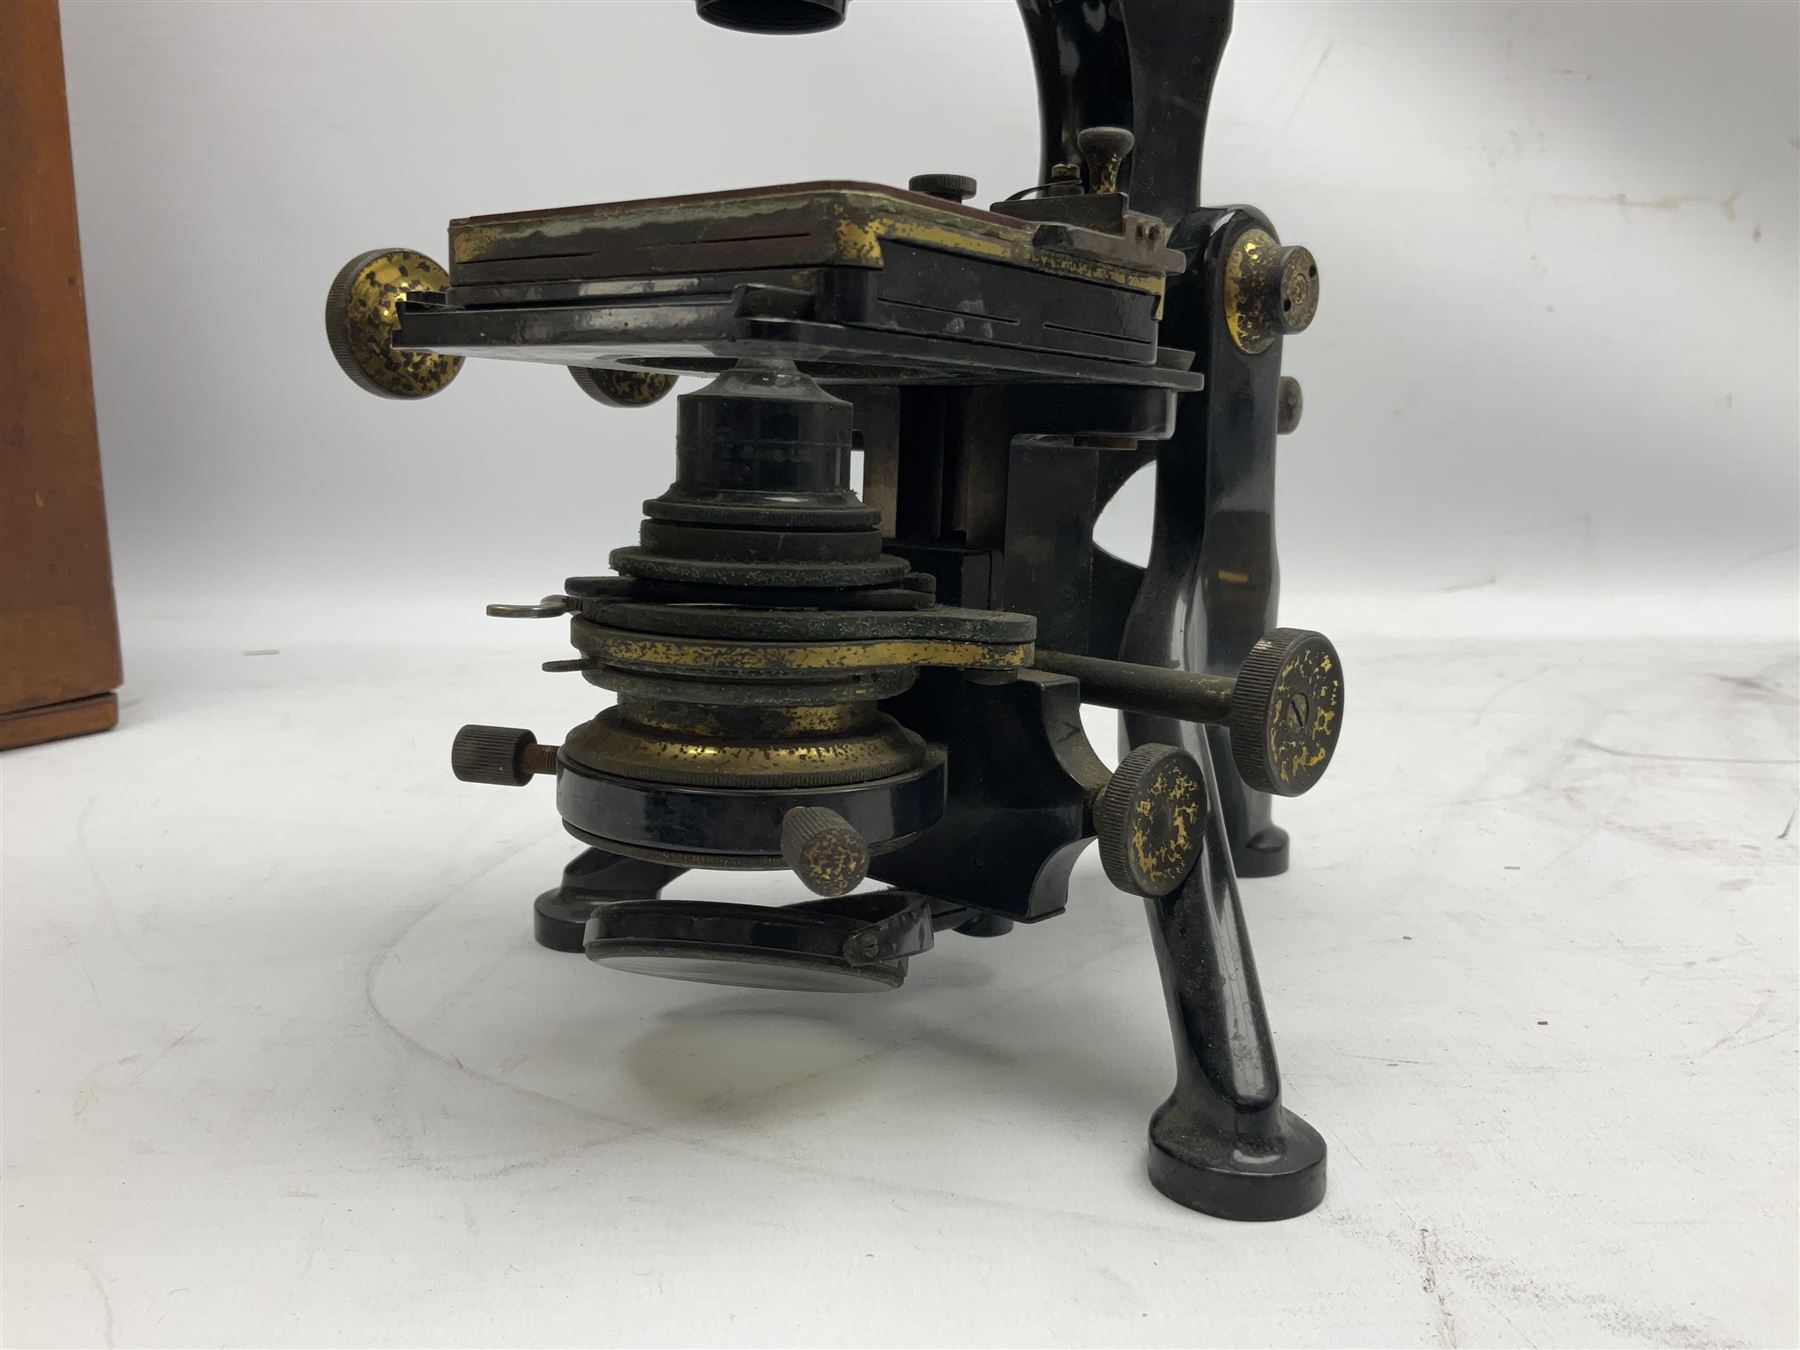 19th century brass and black japanned monocular microscope by W. Watson & Sons Ltd. 313 High Holborn - Image 8 of 15